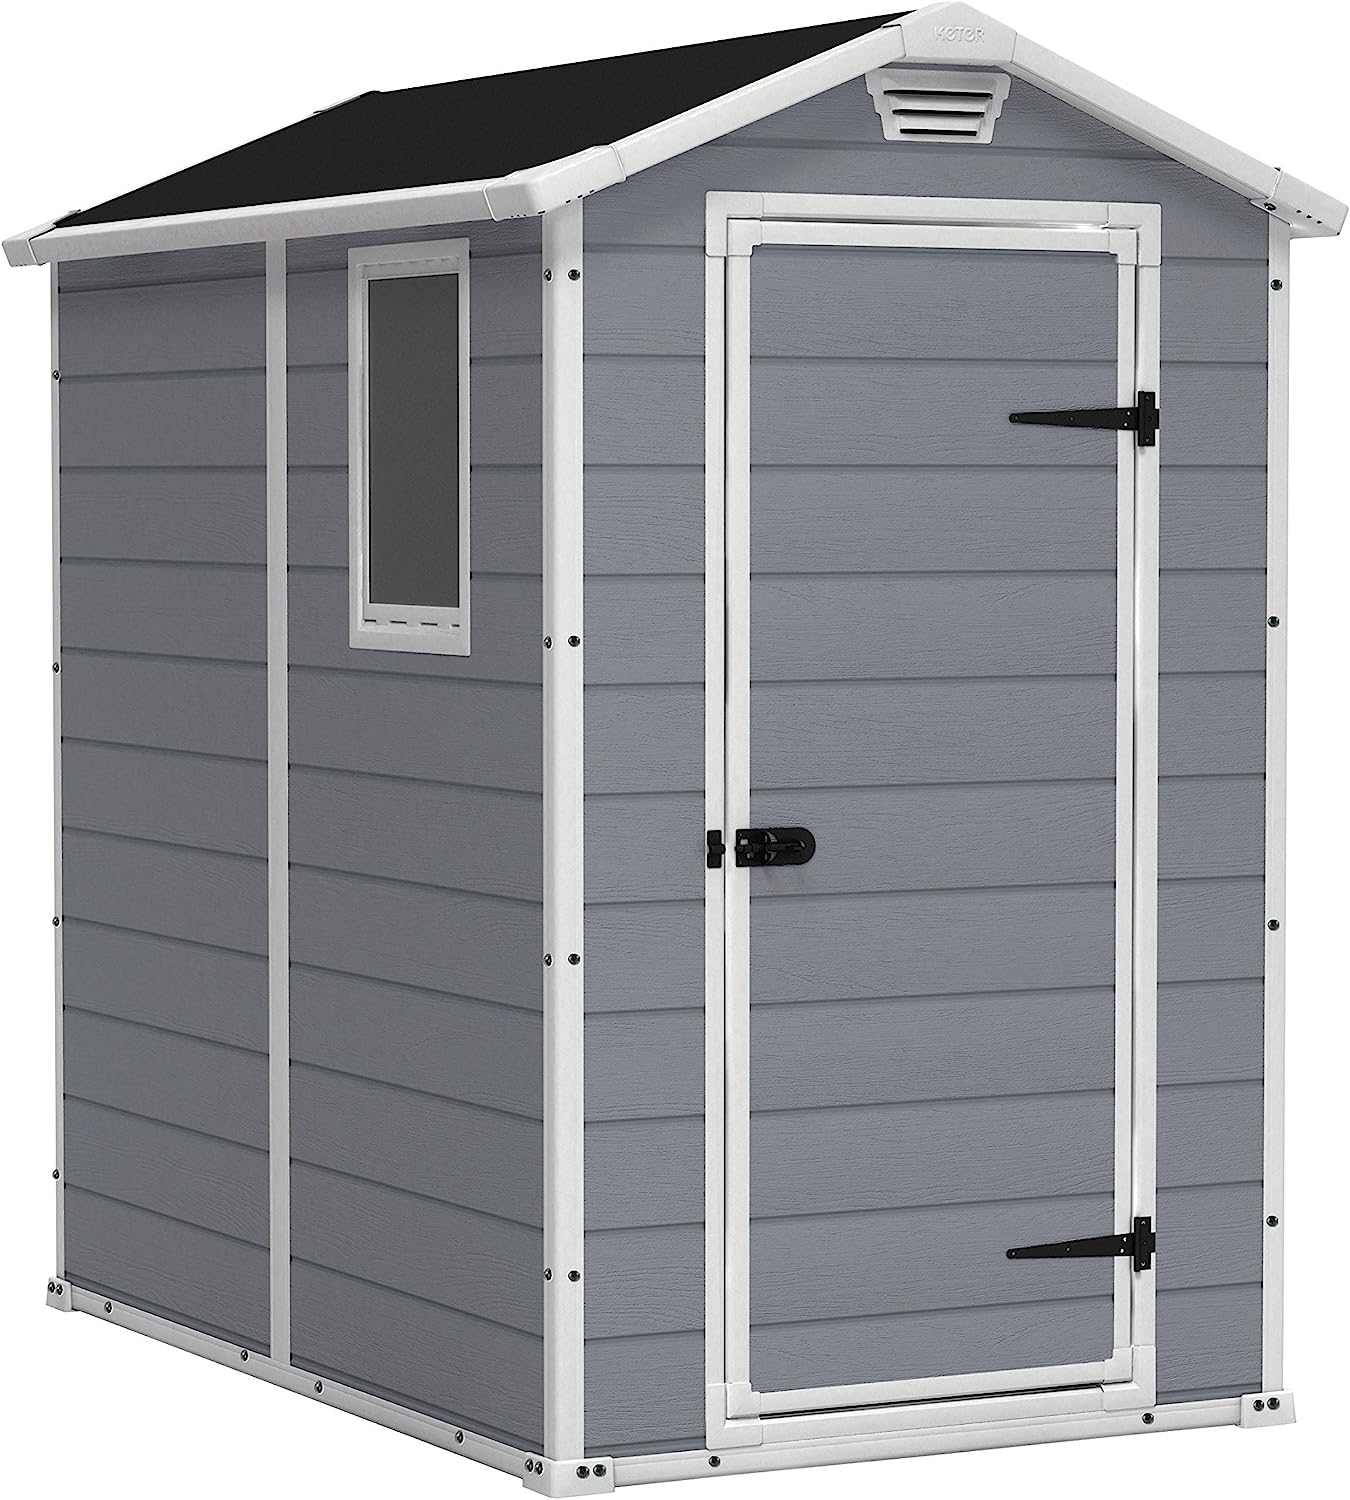 Keter Manor 4x6 Resin Outdoor Storage Shed Kit-Perfect to Store Patio Furniture - $325